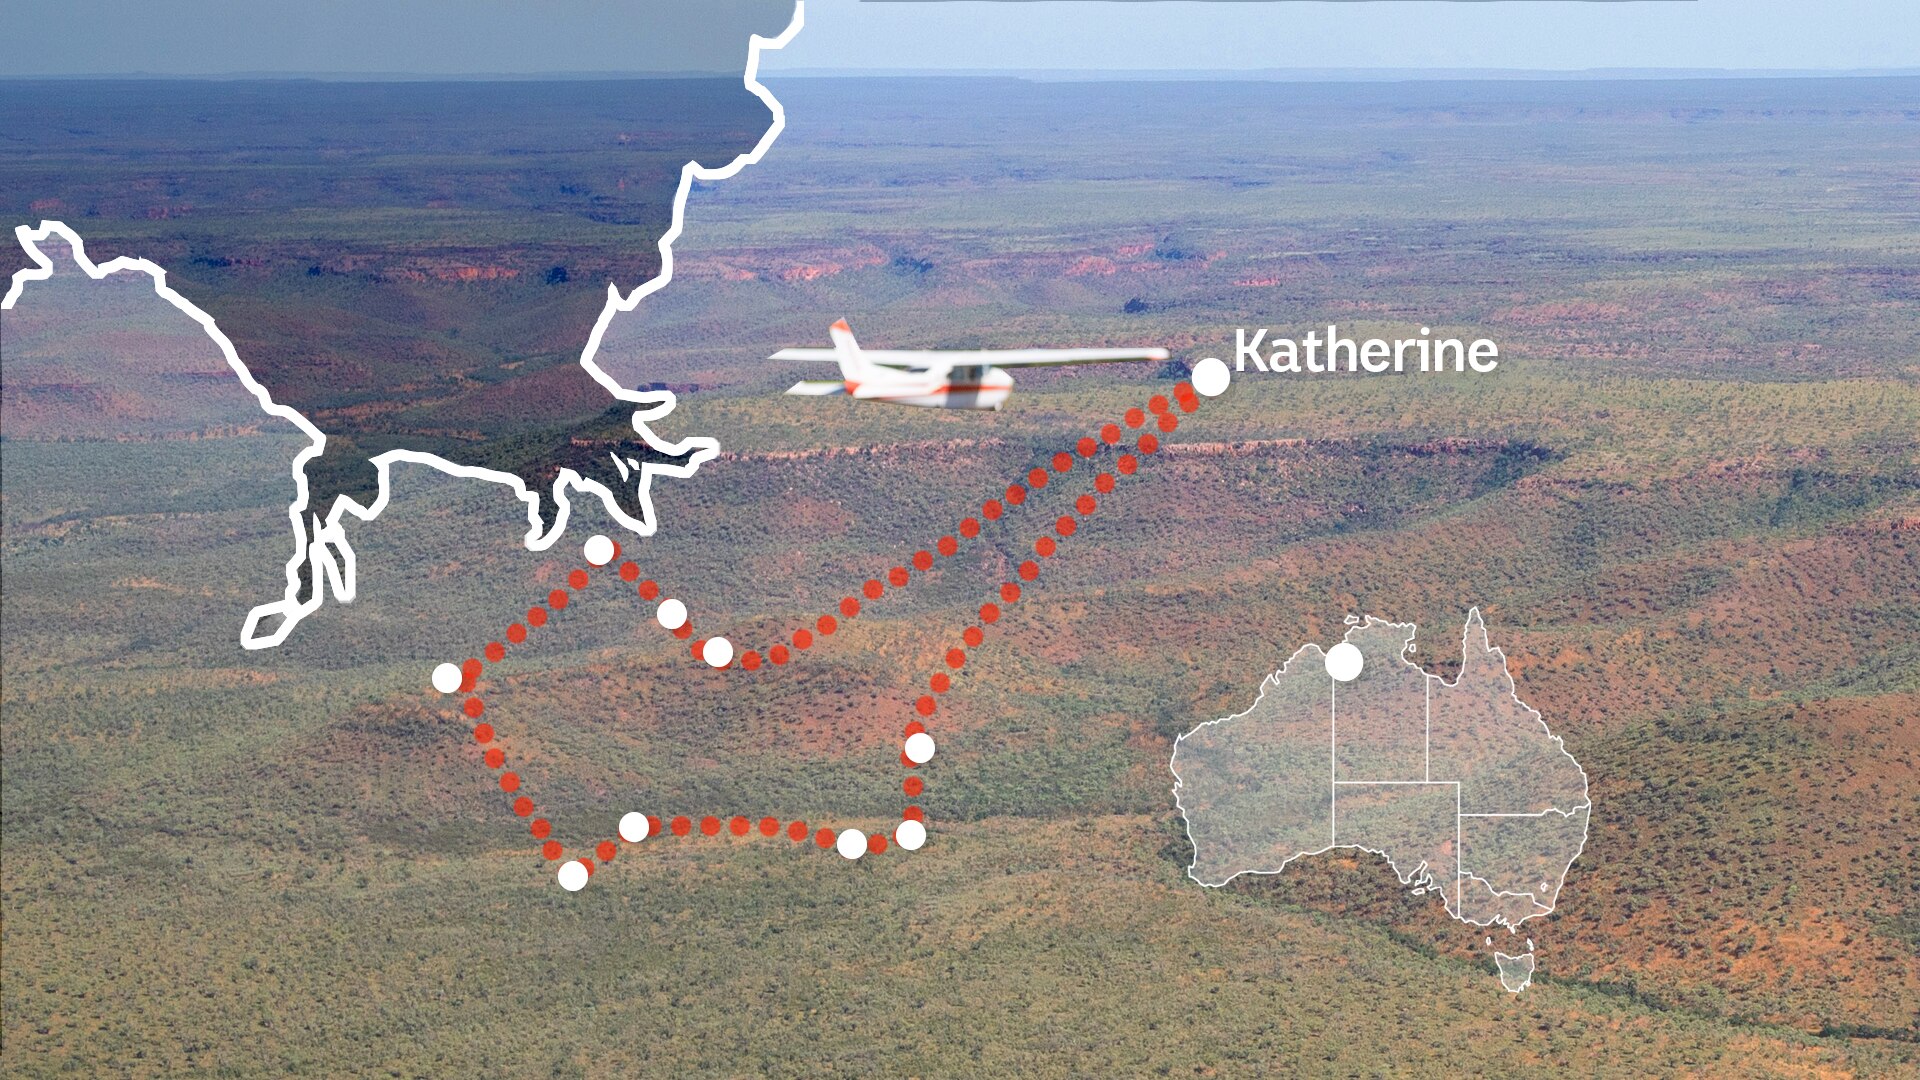 Image of a small plane flying over an outback landscape superimposed with a map of the plane's route south-west of Katherine.